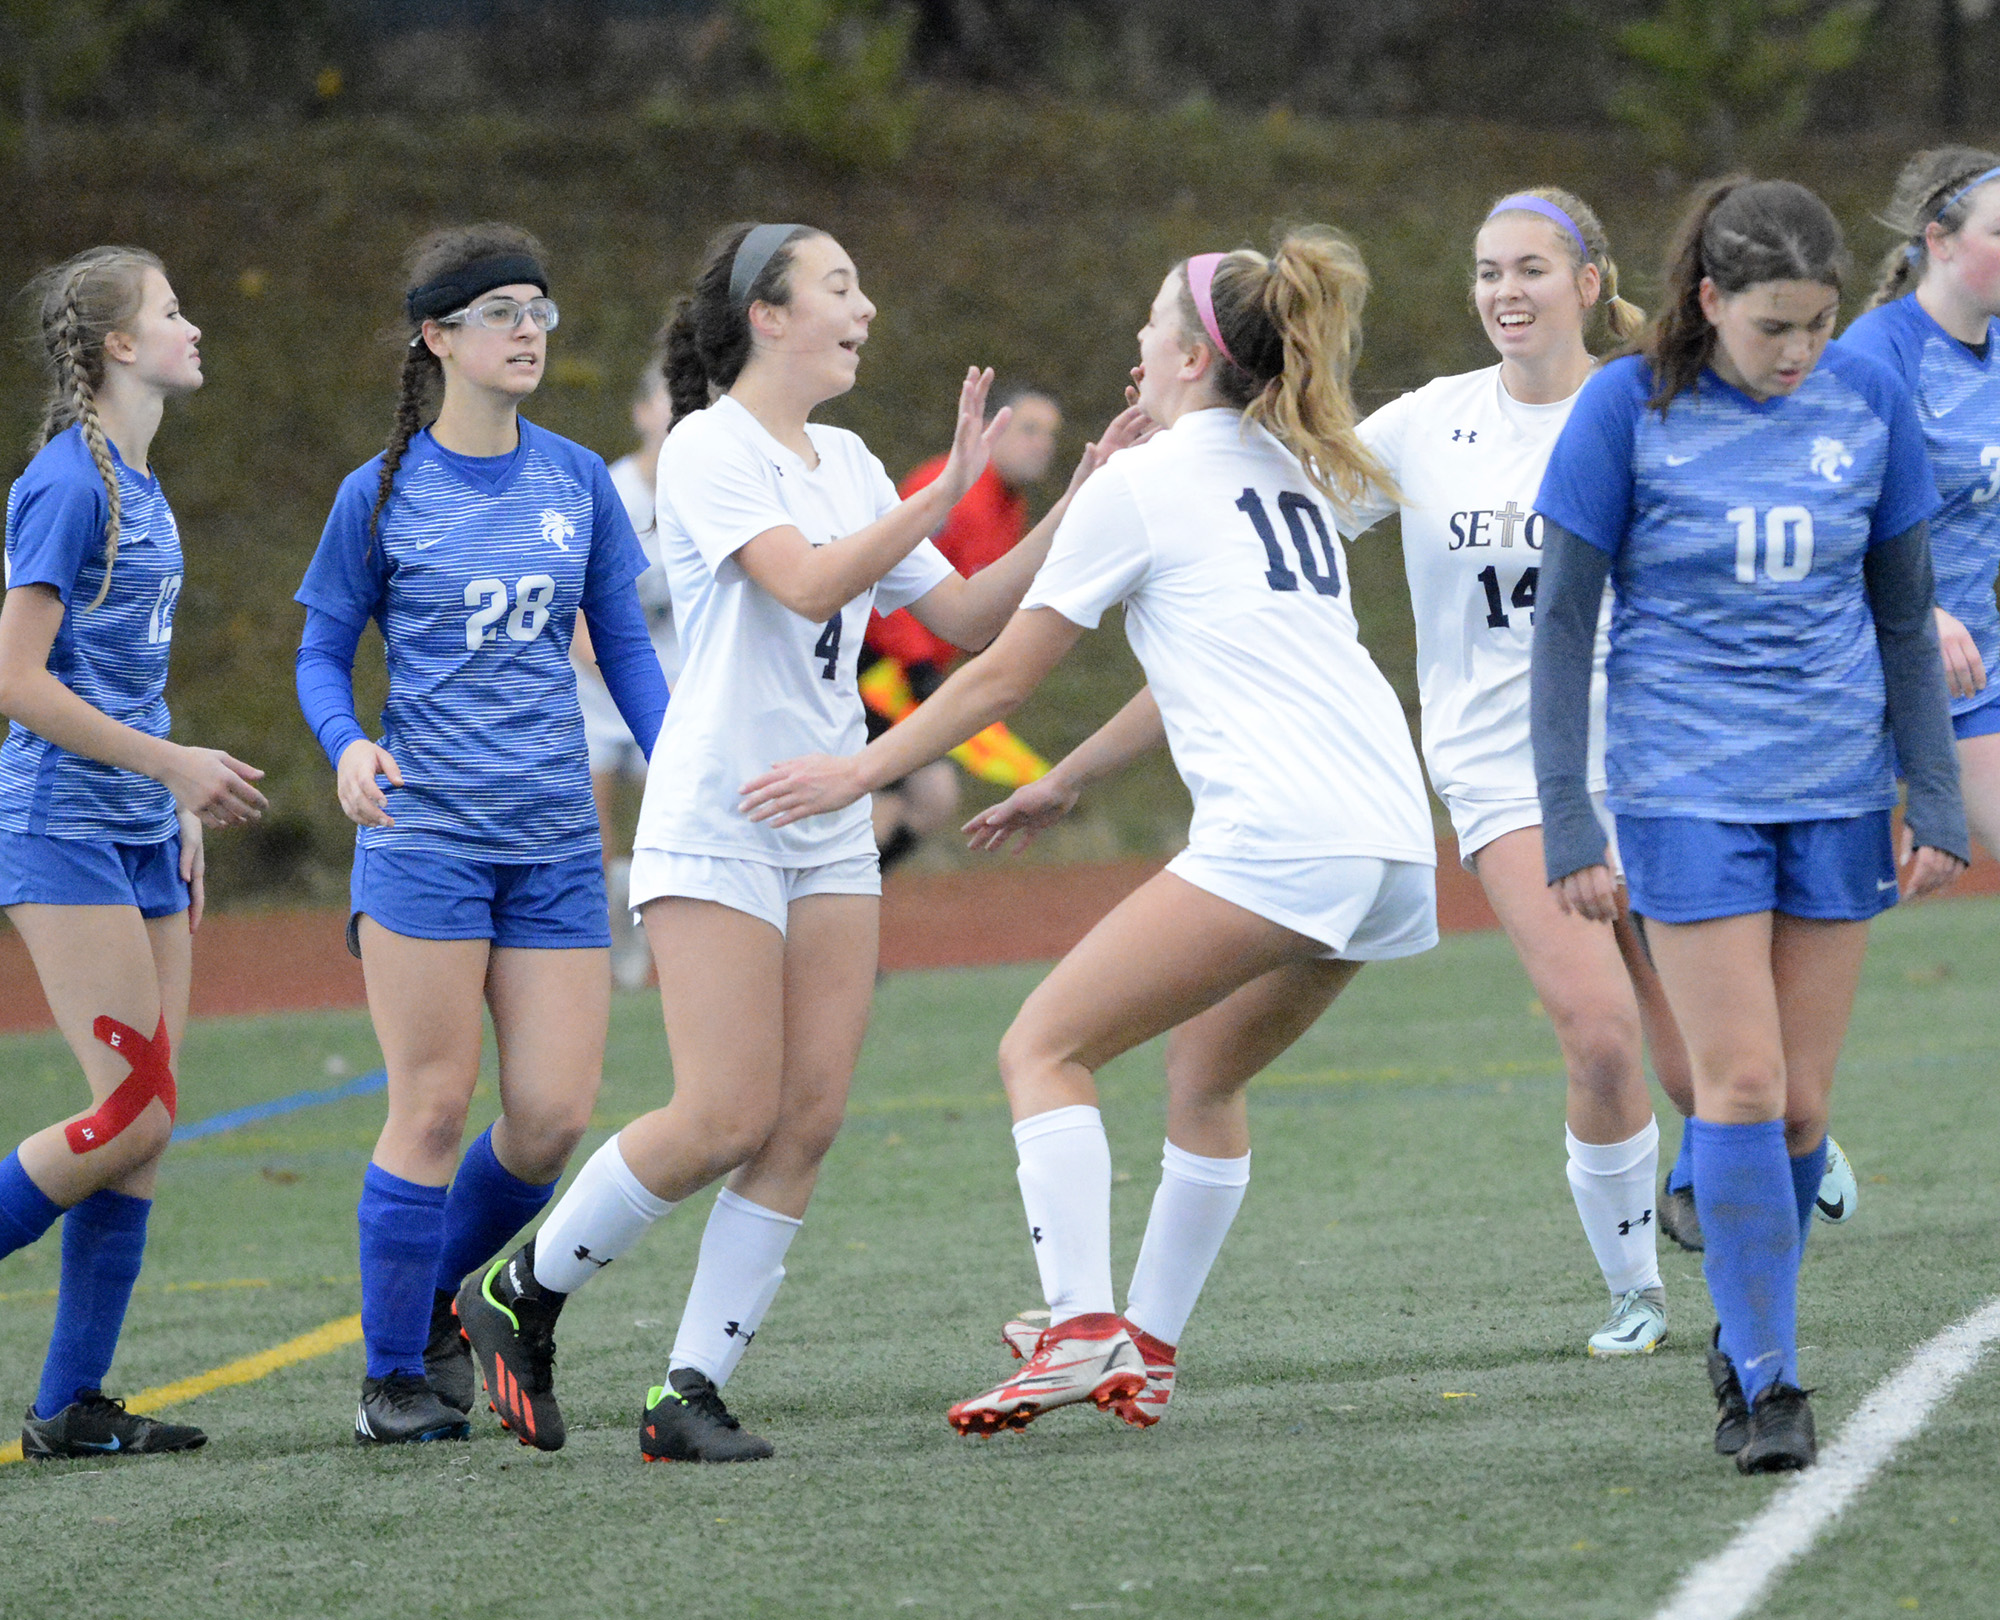 Seton Catholic's Camryn Moore (4) is congratulated by teammate Anna Mooney (10) after Moore scored a goal during the 1A girls soccer district third-place match at King's Way Christian High School on Saturday, Nov. 5, 2022.